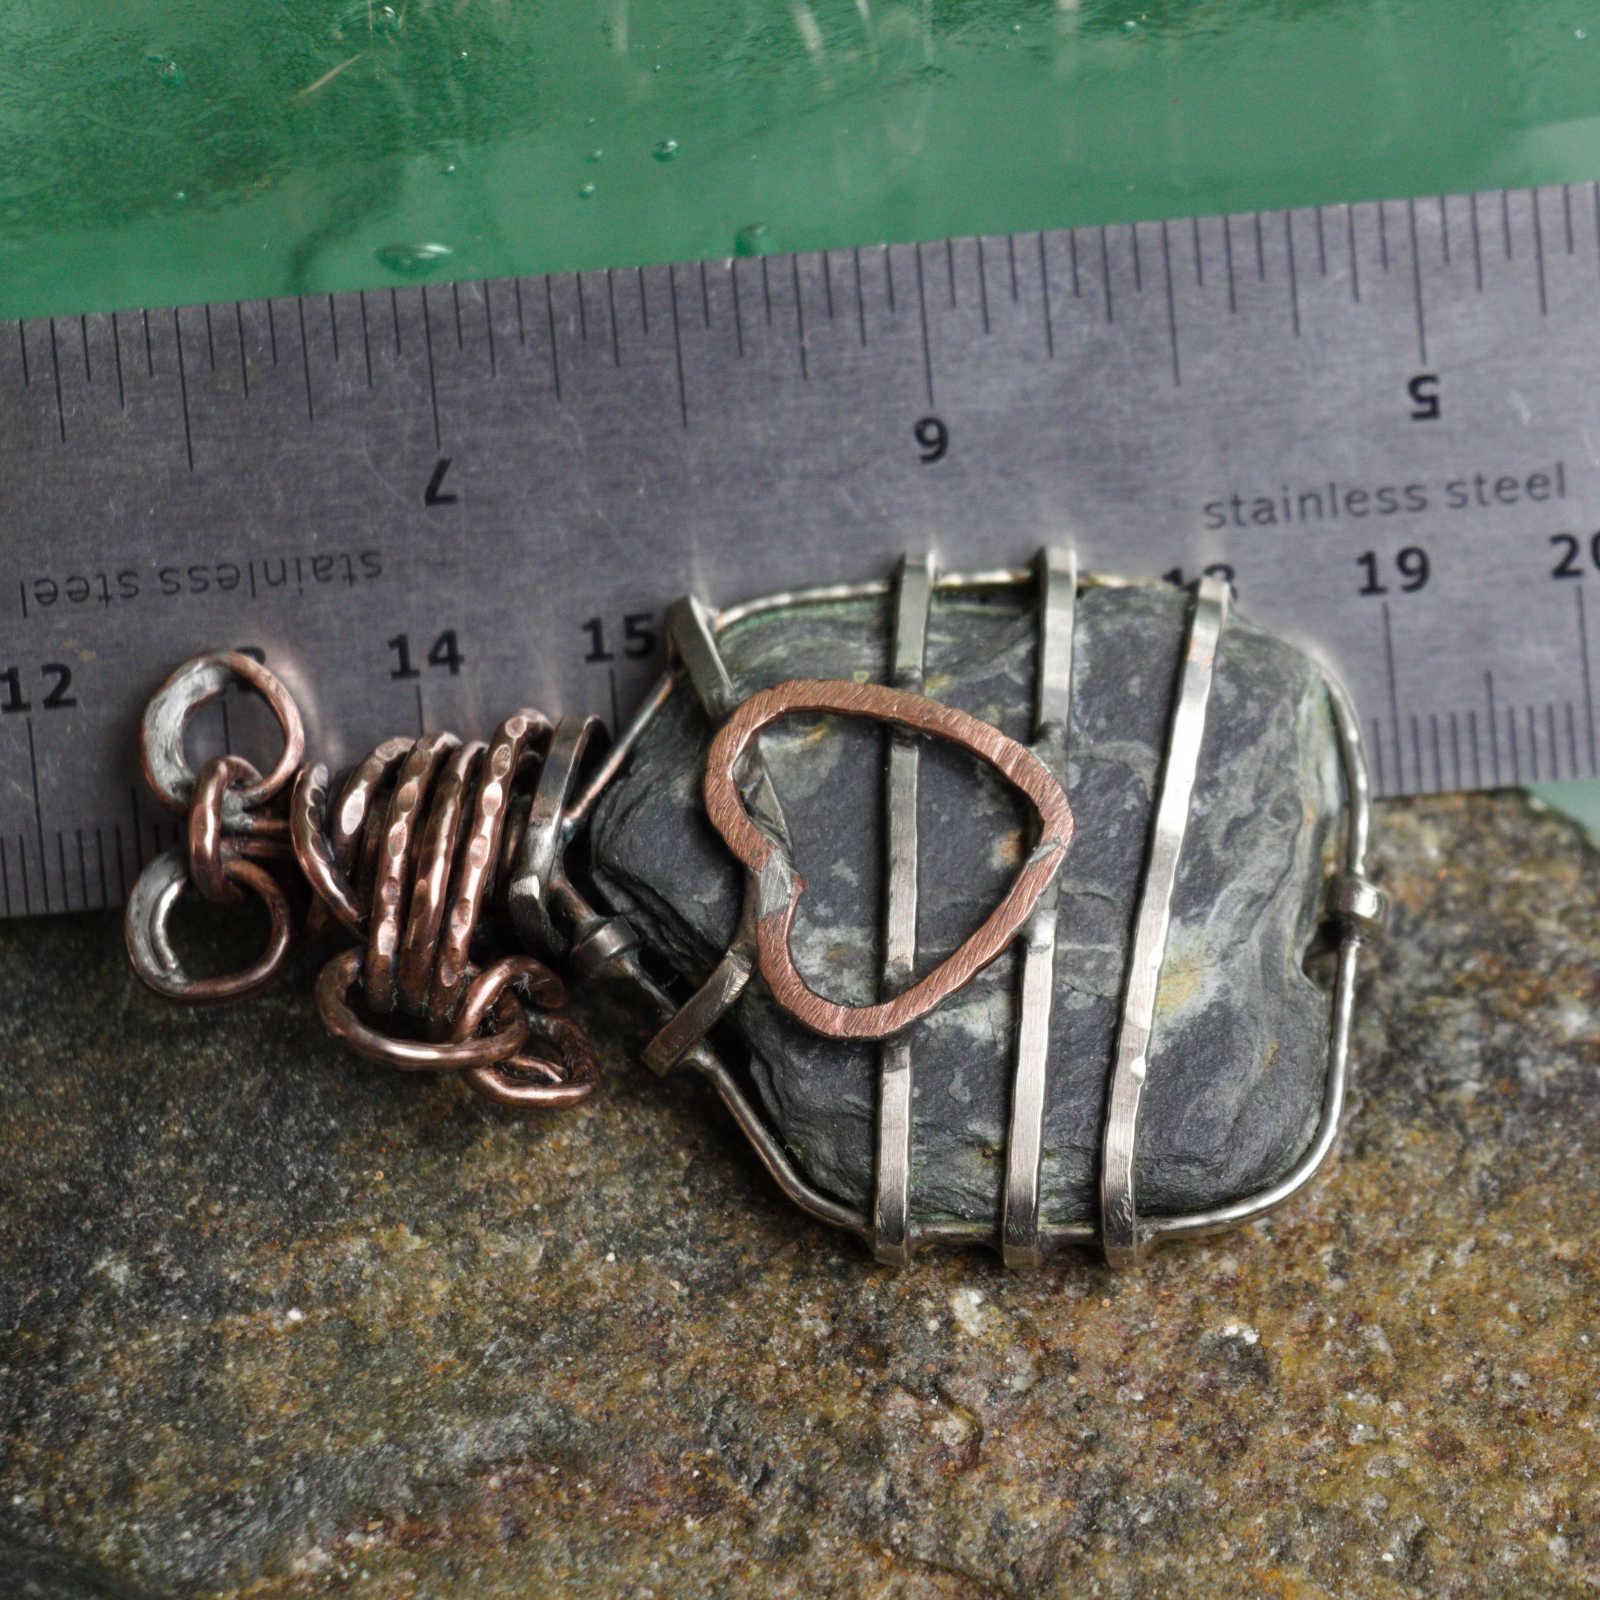 sea slate accessory, with ruler to show scale